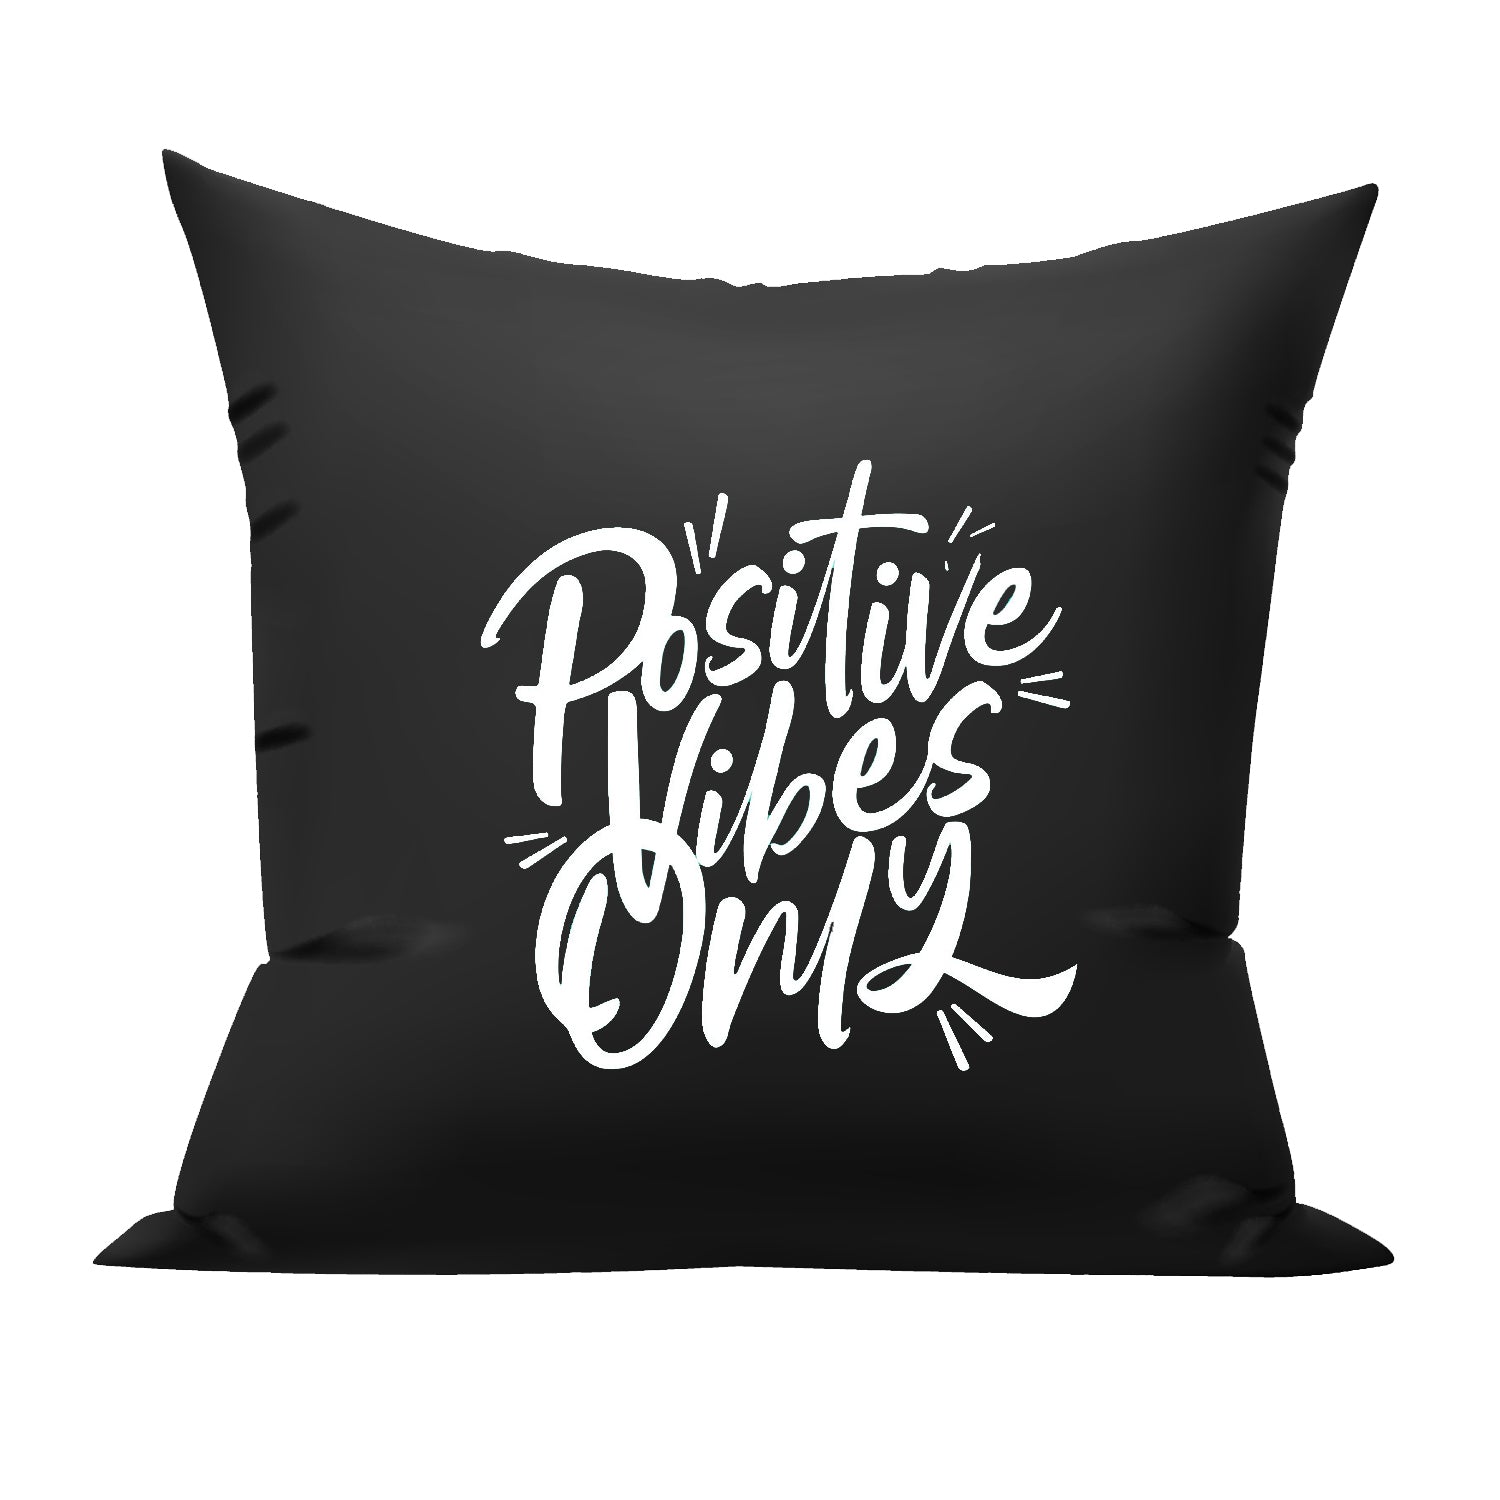 Positive Vibes Only cushion